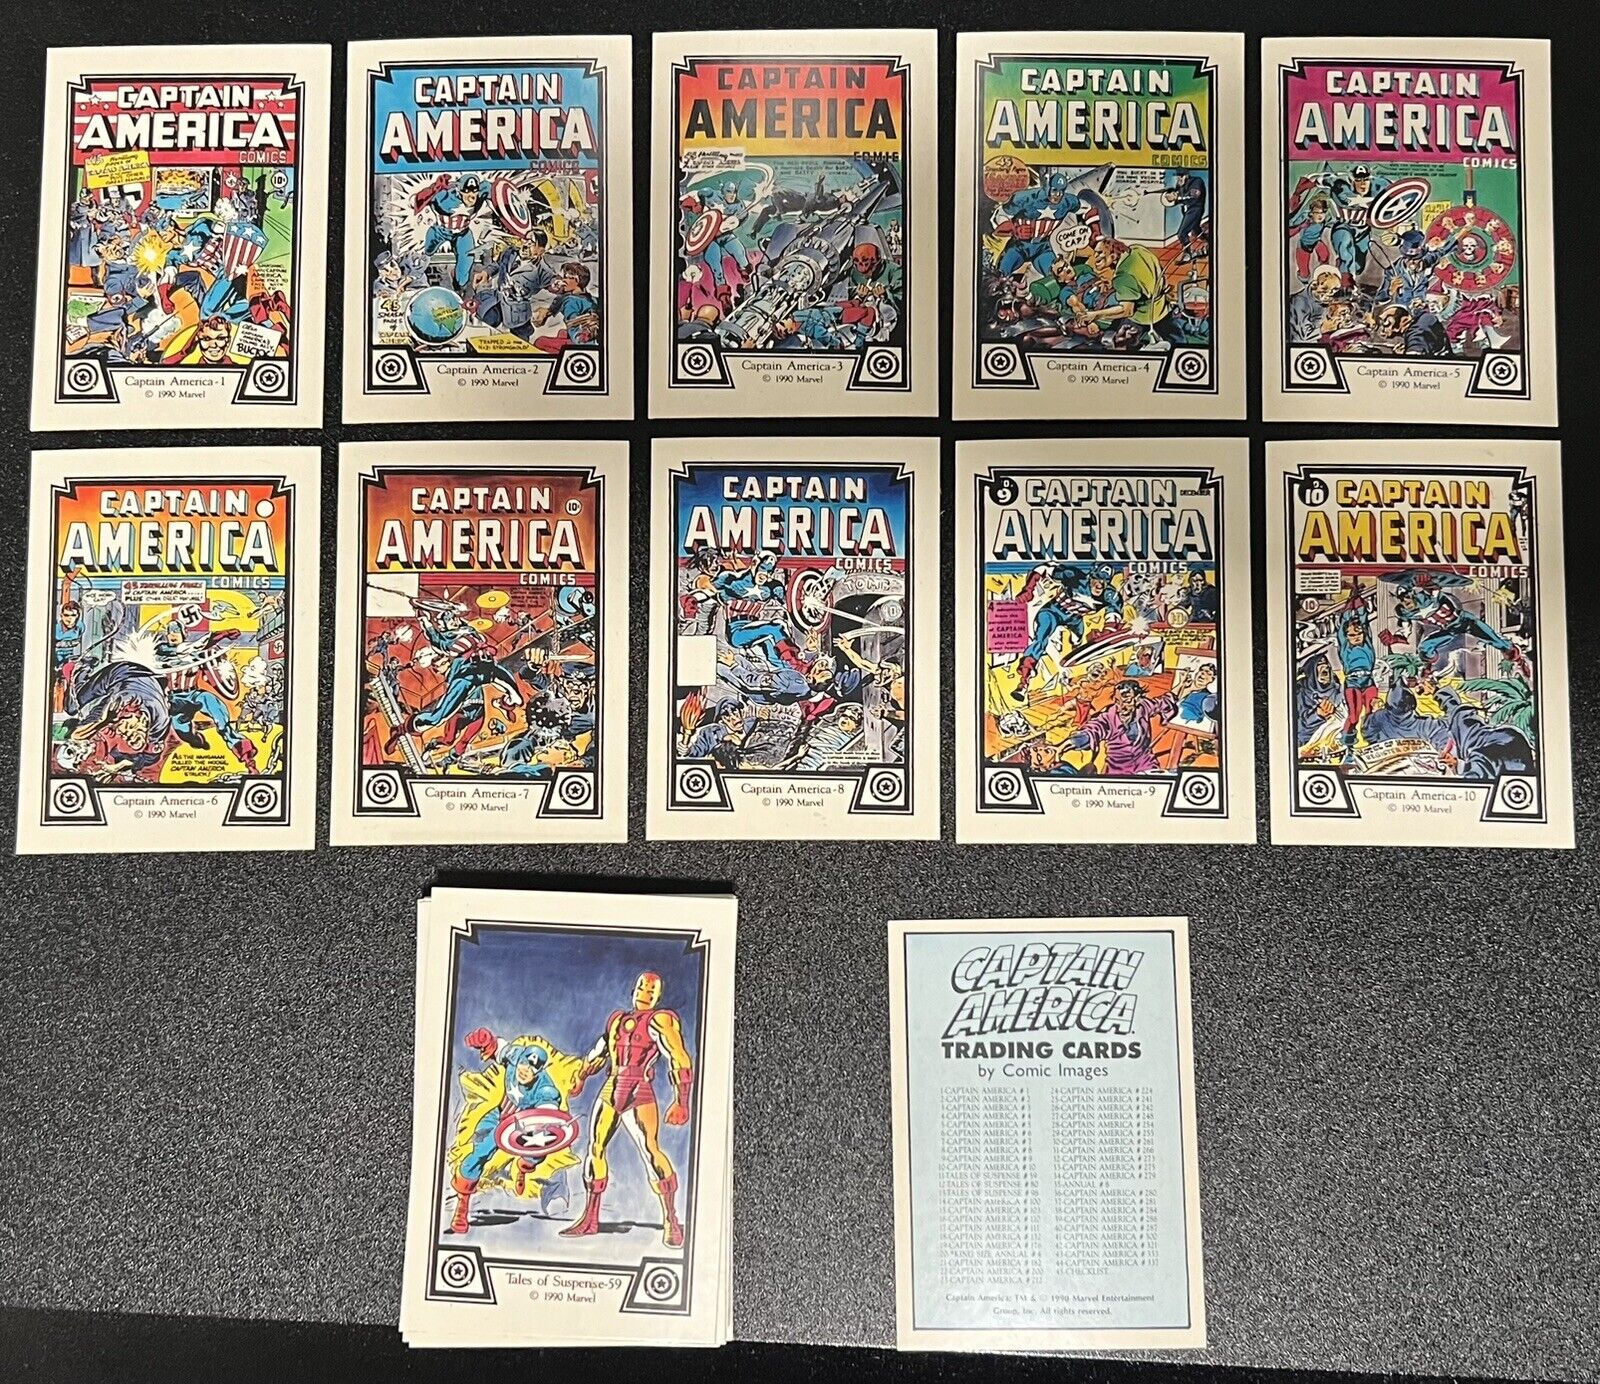 CAPTAIN AMERICA MARVEL CARD SET Comic Images 1990 Complete ~ ALL 45